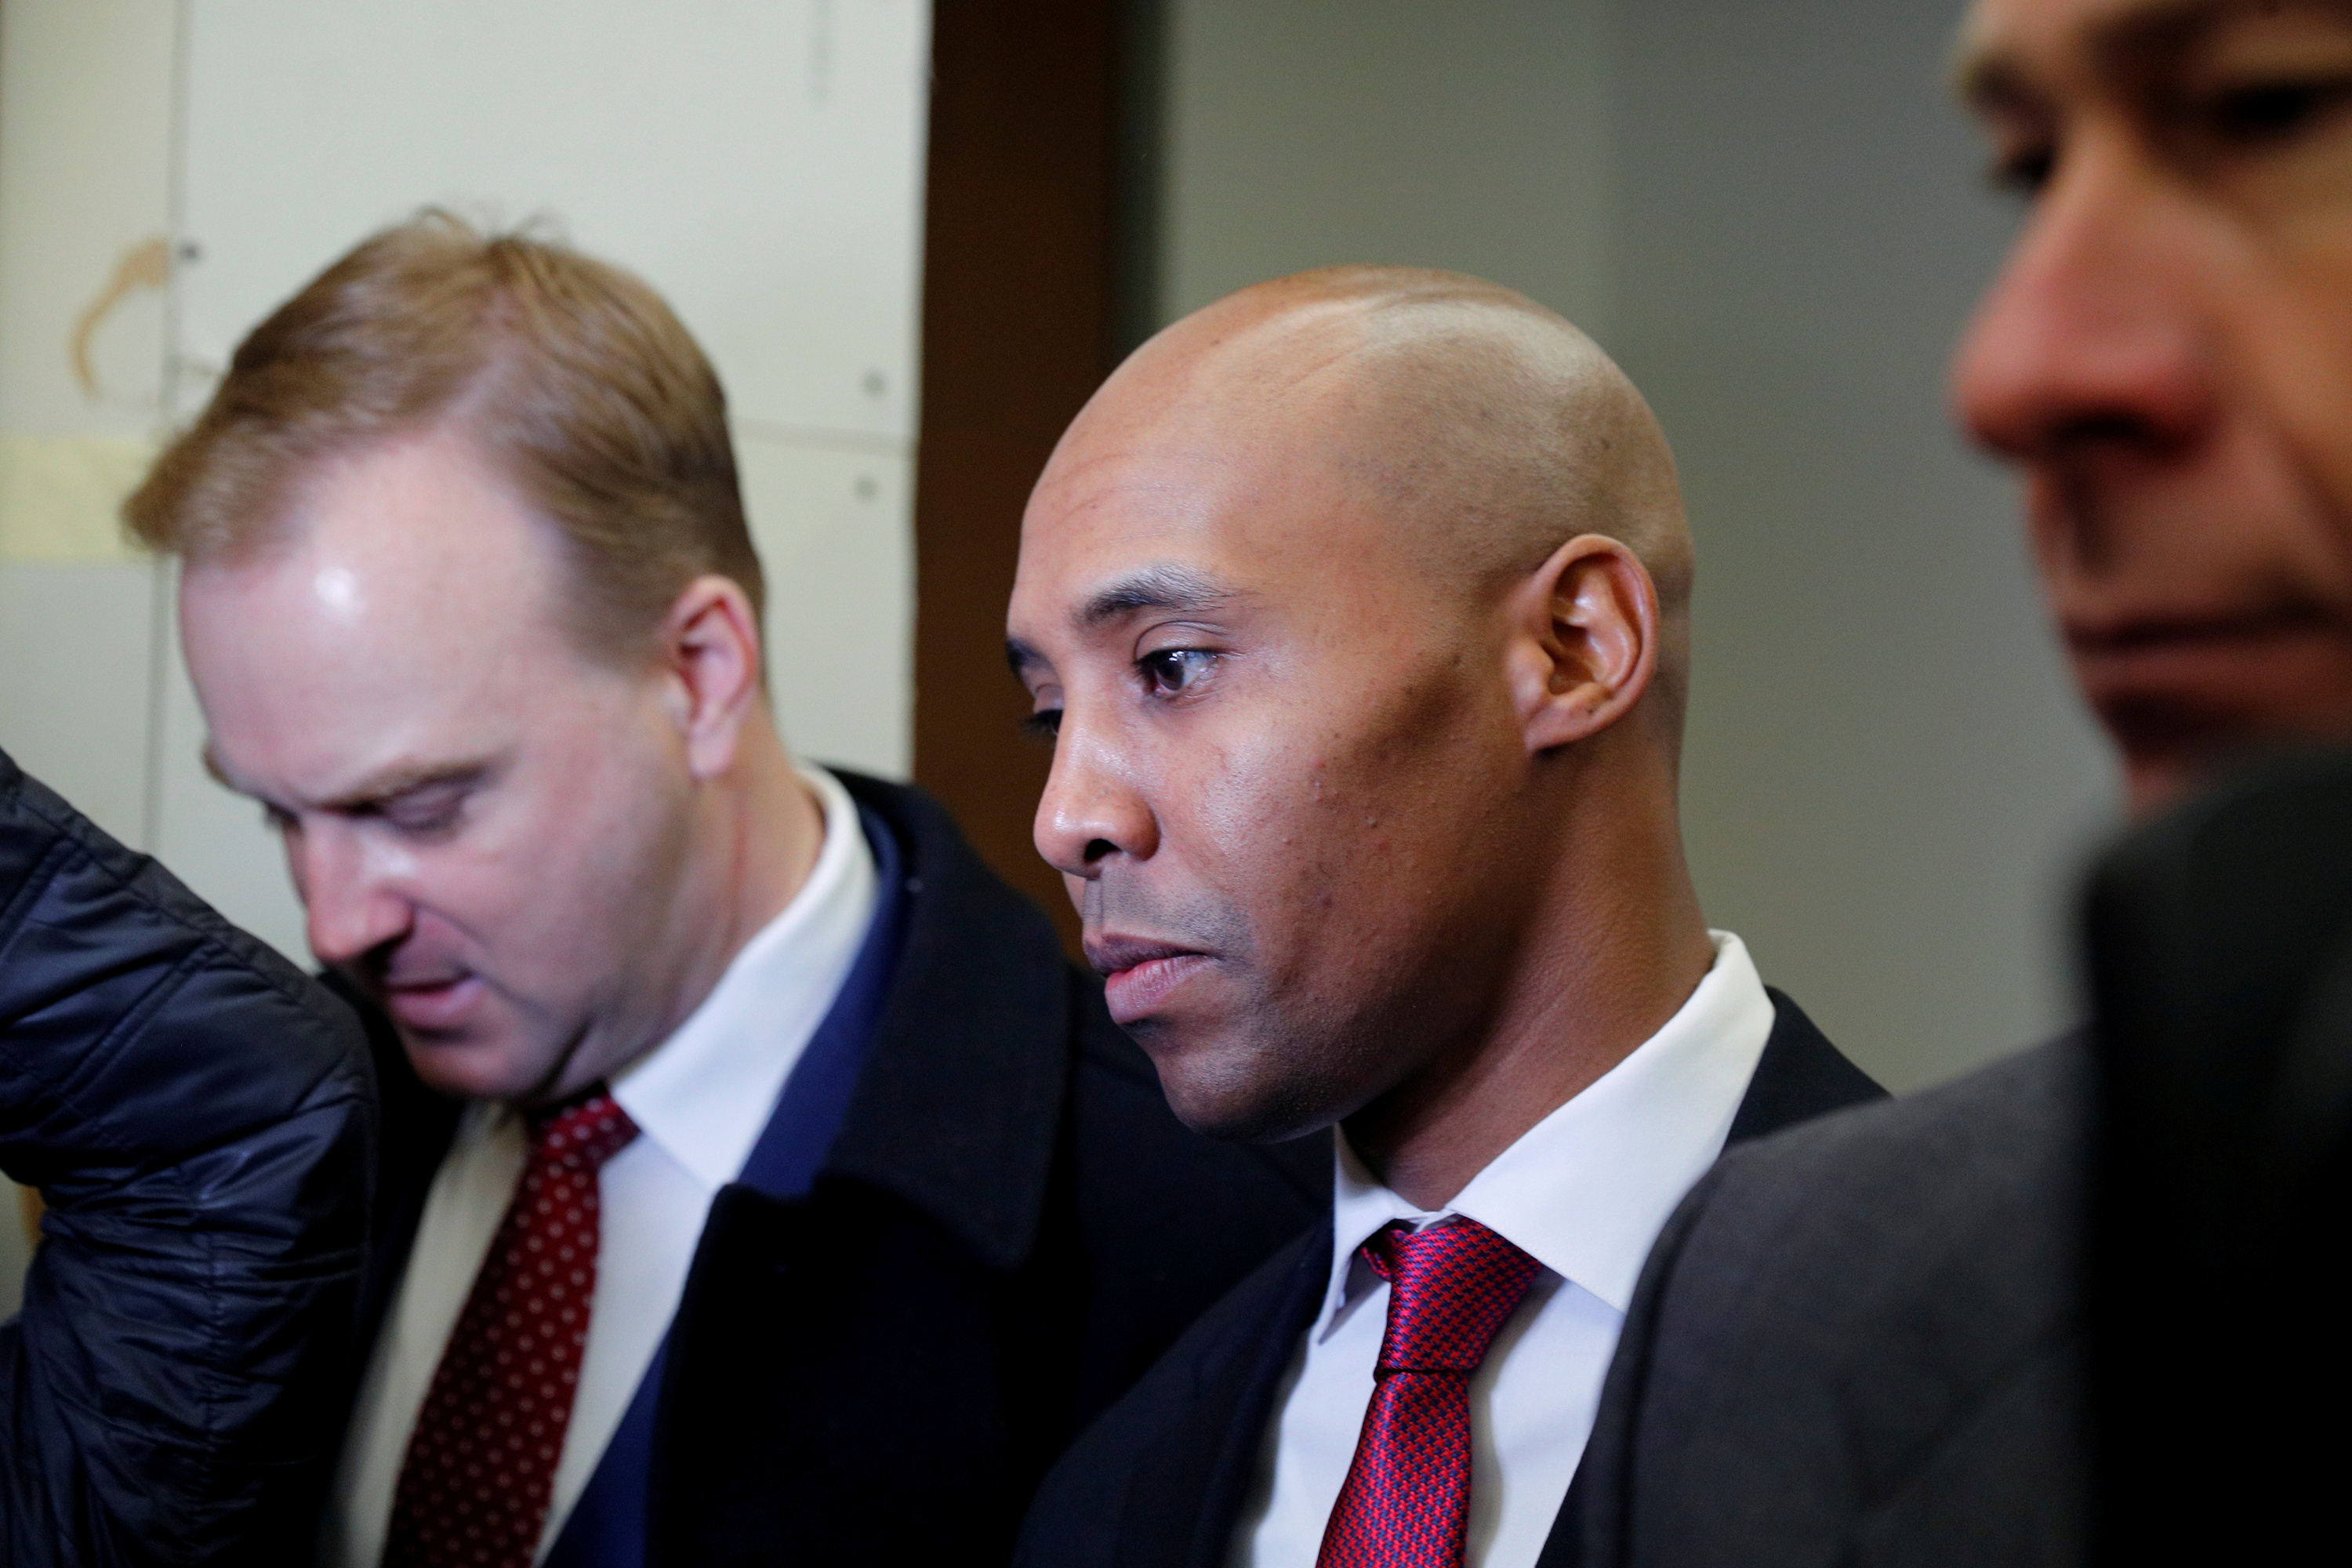 Attorneys Peter Wold, Thomas Plunkett and Mohamed Noor enter the courthouse prior to the start of the murder trial of former Minneapolis police officer Mohamed Noor in Minneapolis